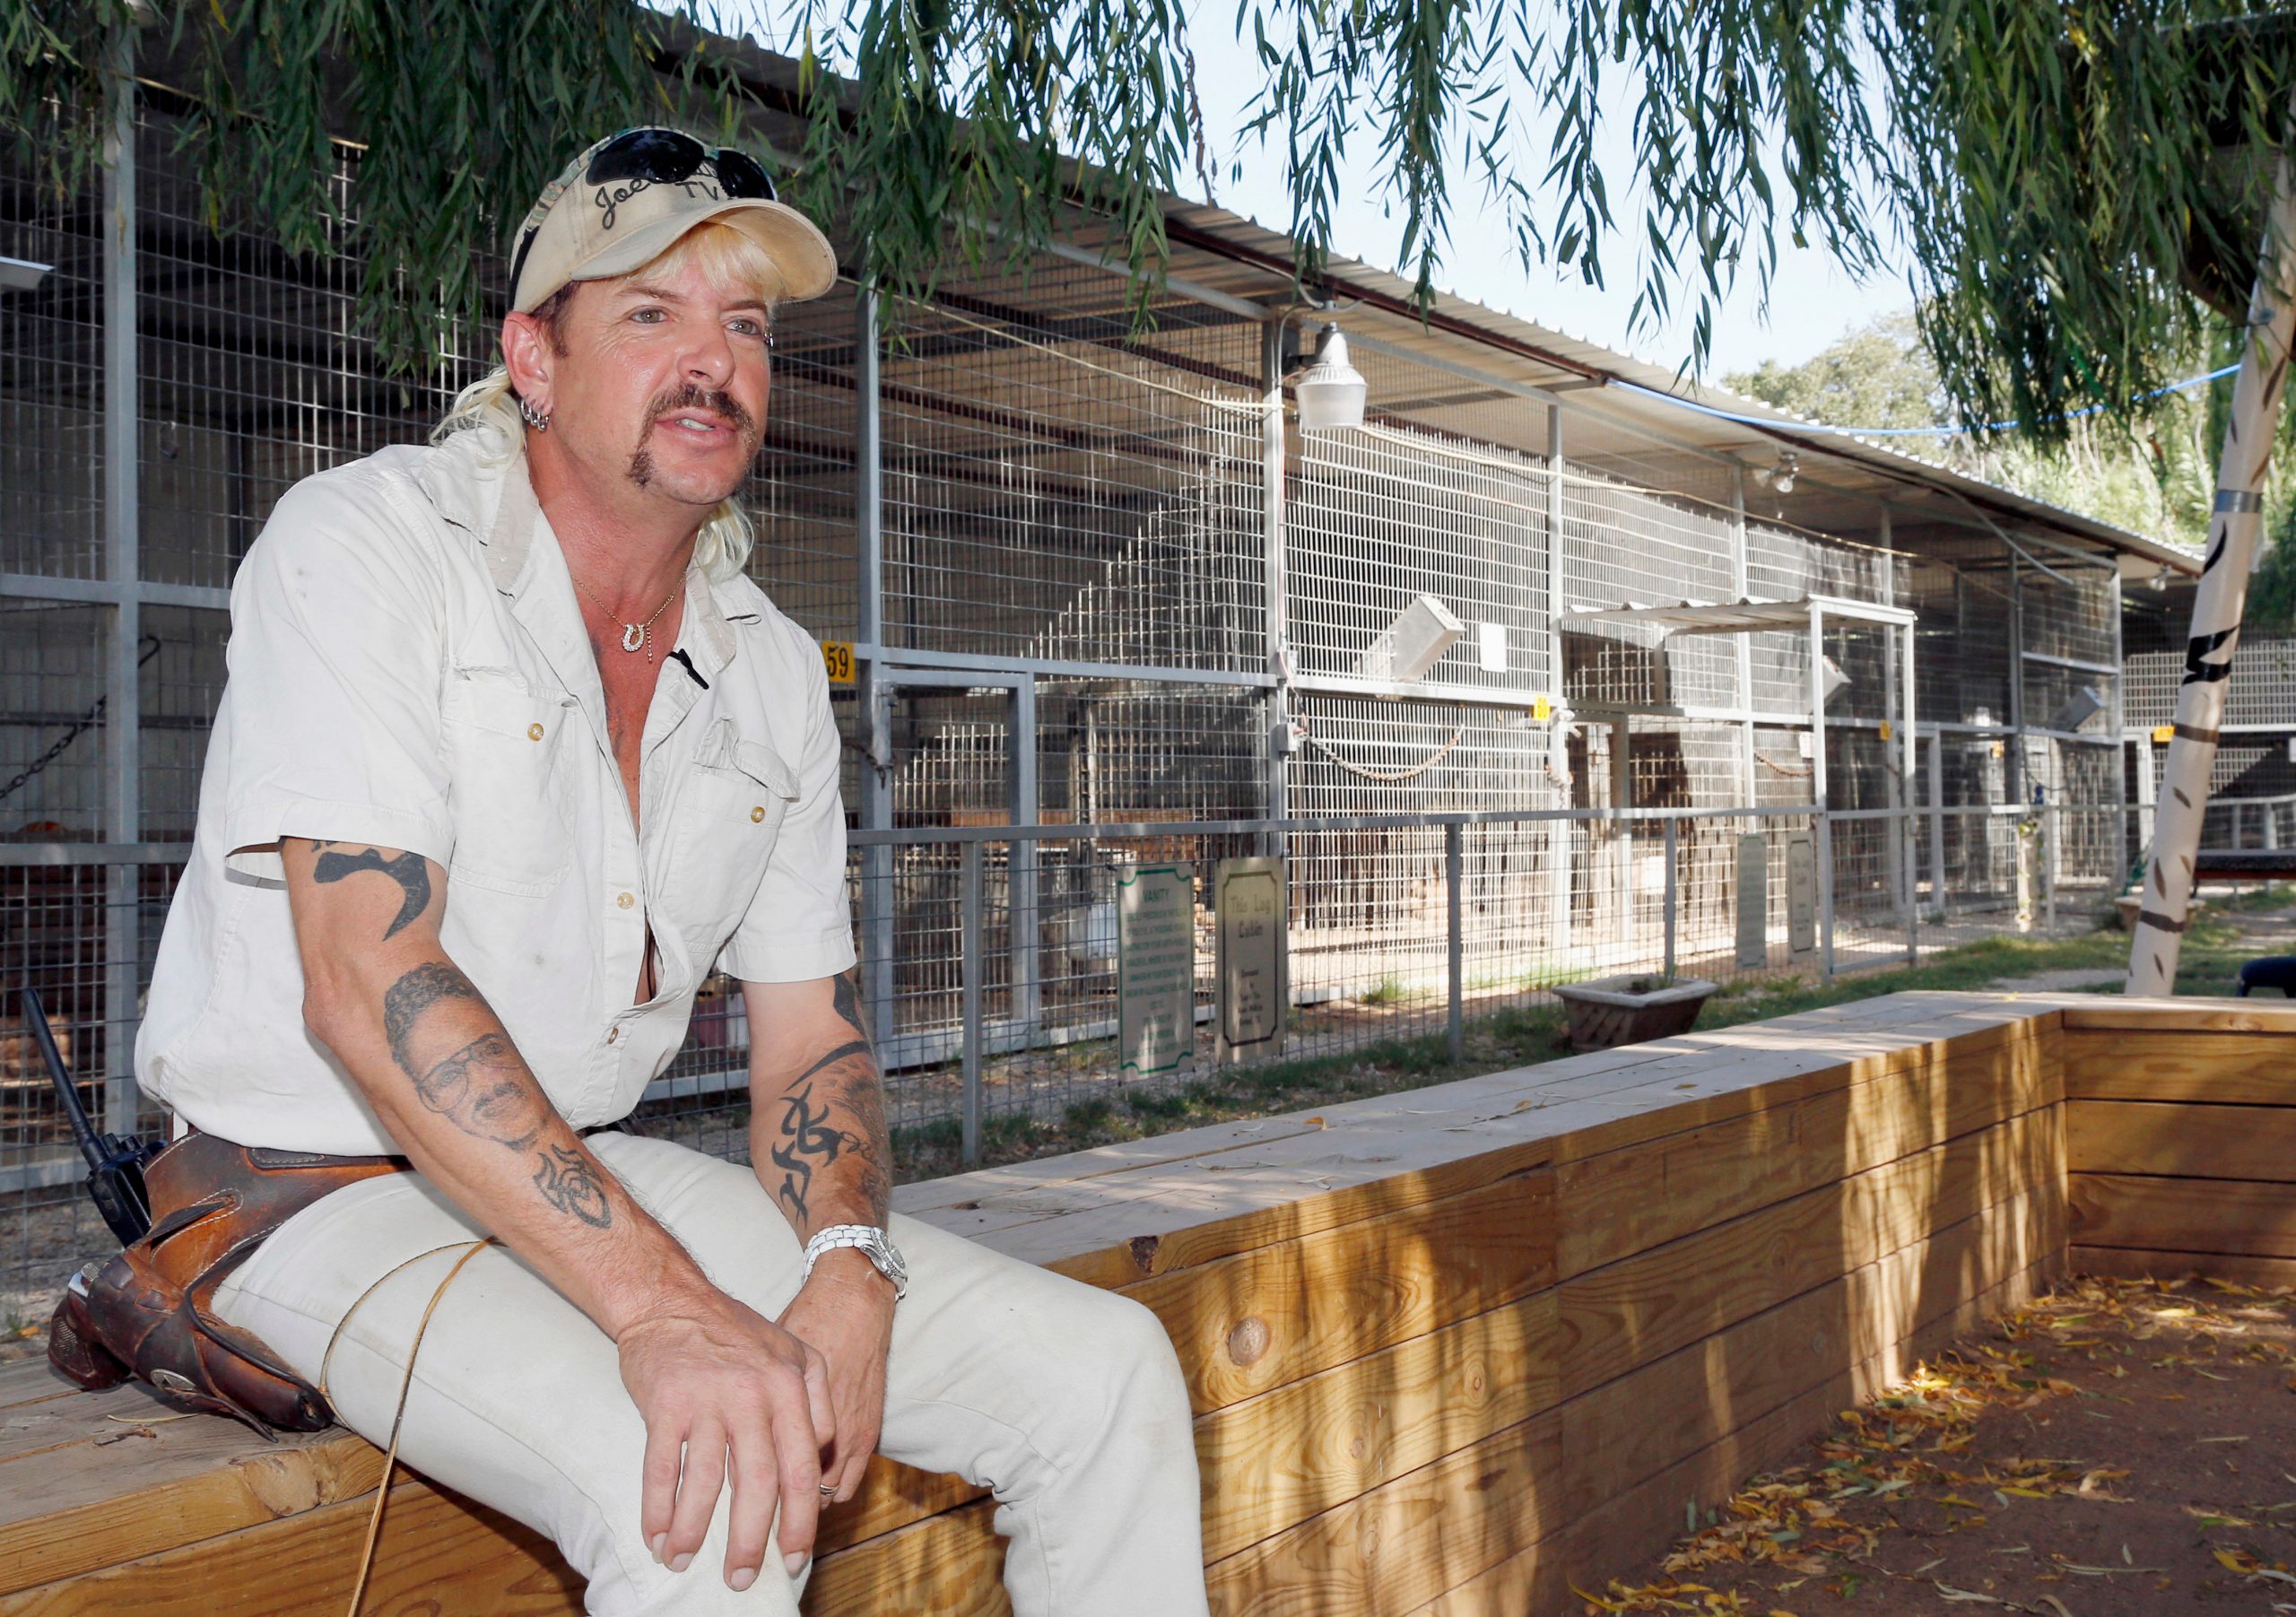 Does Joe Exotic have cancer?